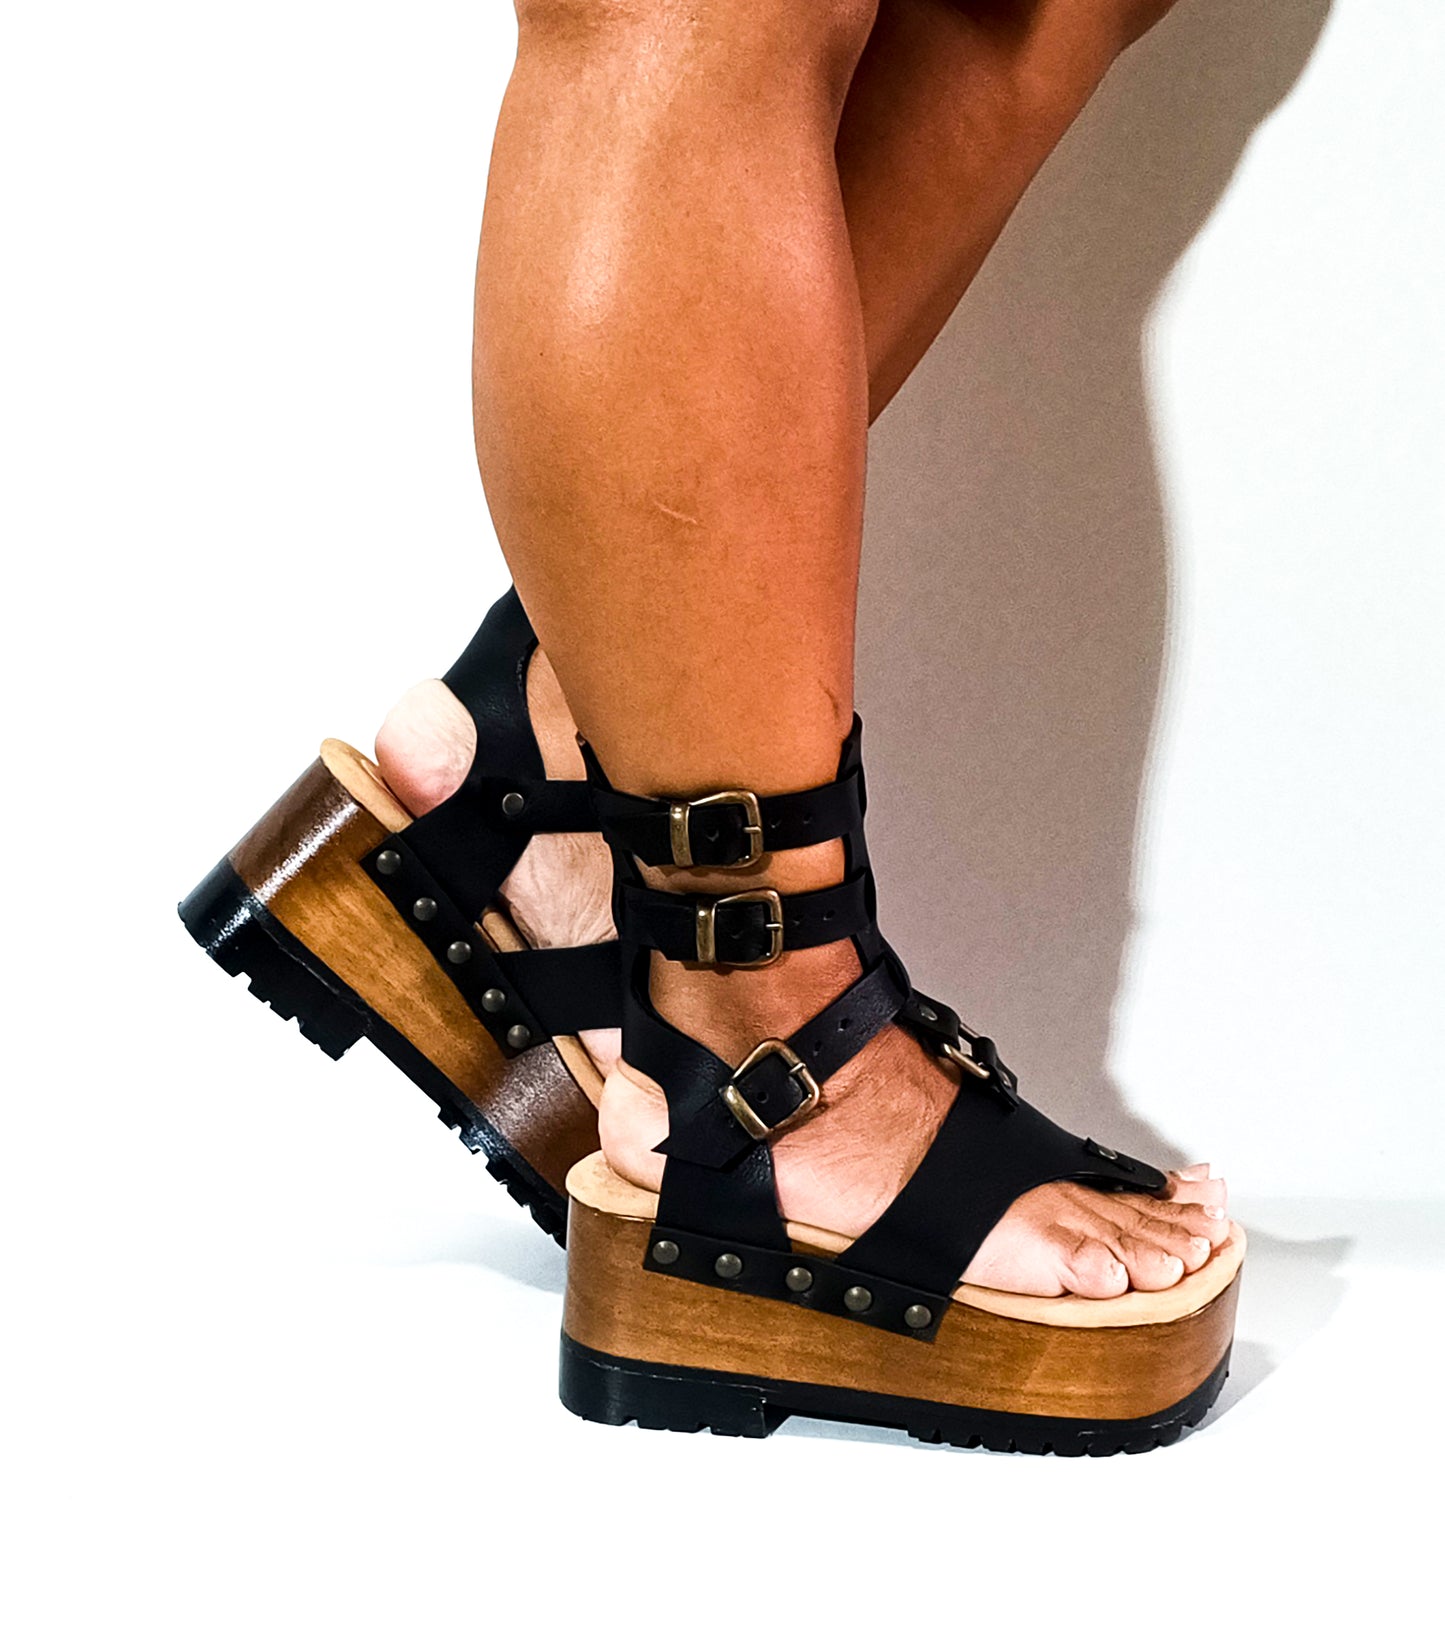 Sandal with straps, flip flop style. Flip flop style sandal with wooden wedge. Flip flop style clog sandal. Gladiator style leather sandal. Sizes 34 to 47. High quality handmade leather shoes by sol Caleyo. Sustainable fashion.